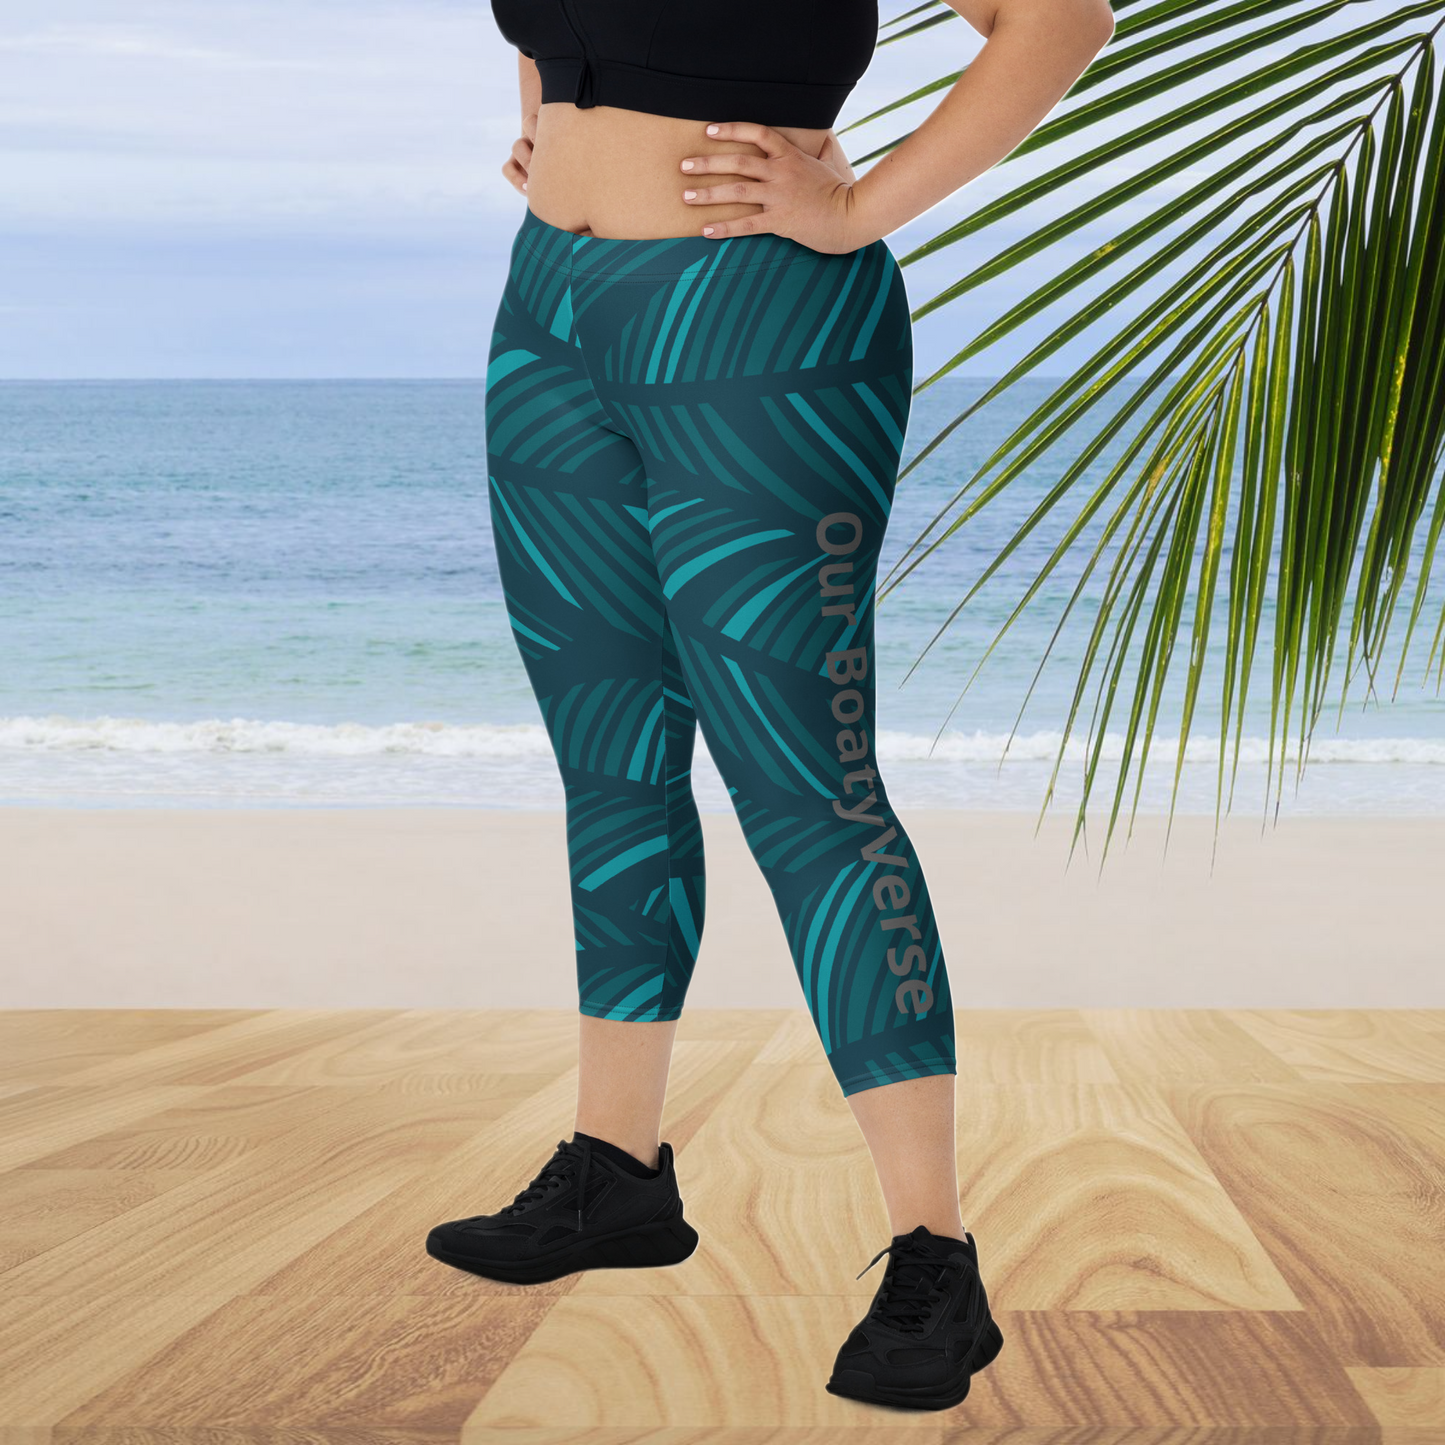 At one with Nature, Gym Leggings by Our BoatyVerse